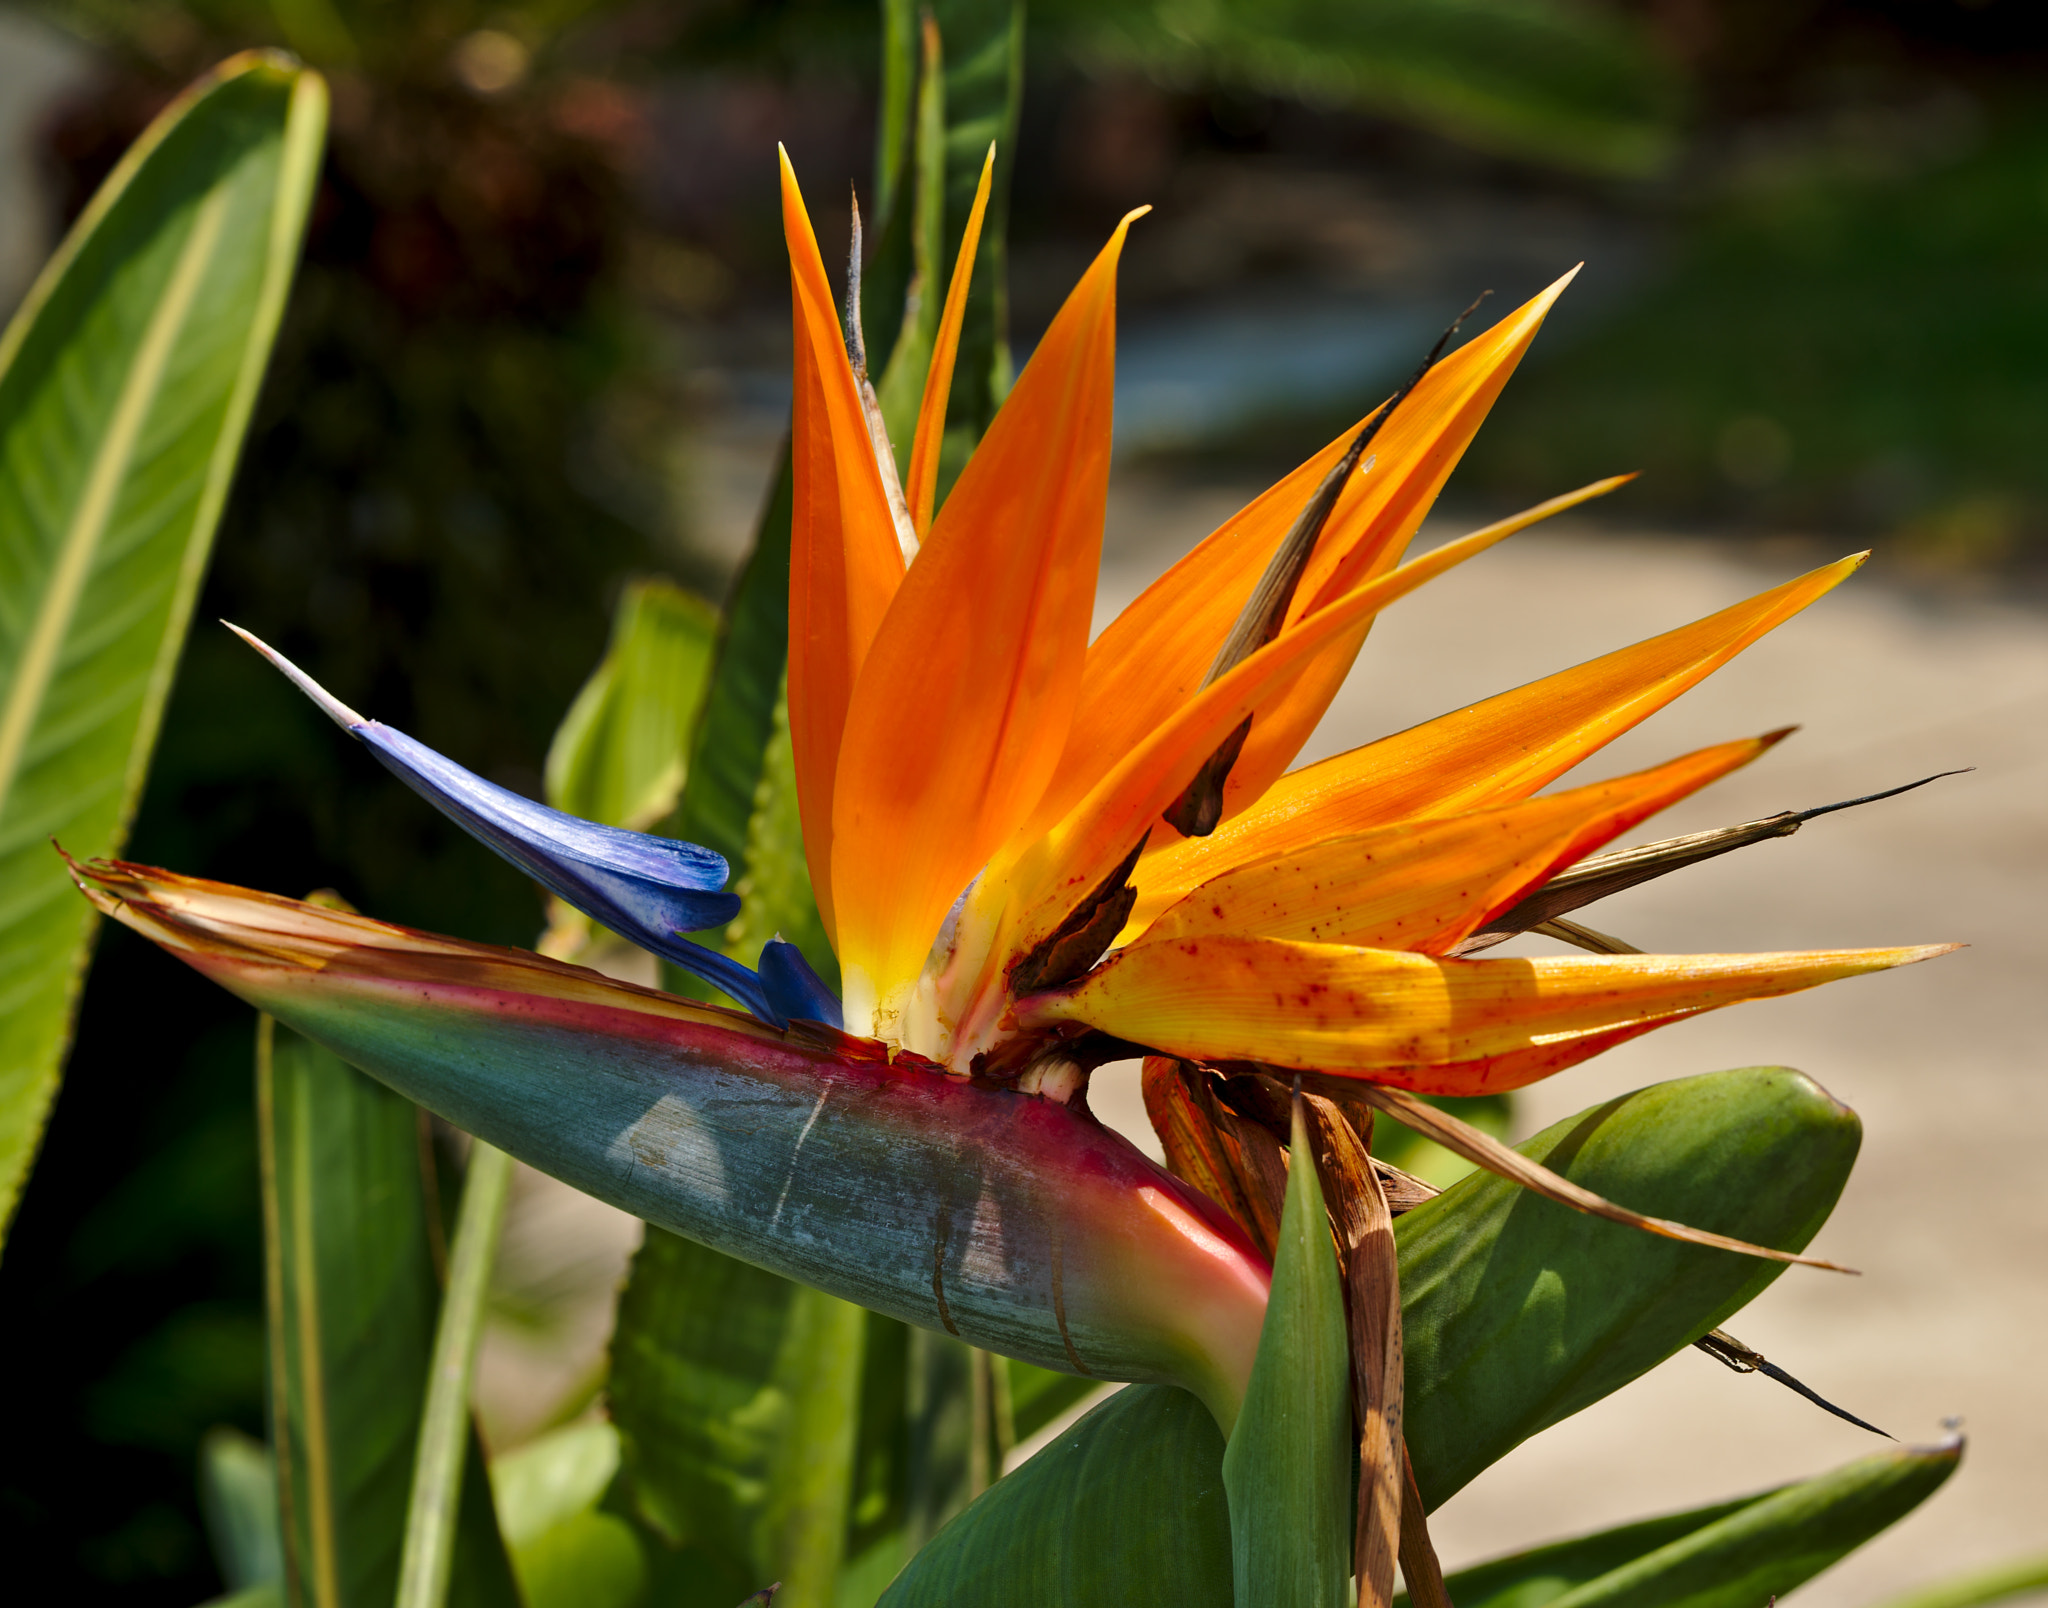 ZEISS Otus 85mm F1.4 sample photo. Mexican bird of paradise or streliza photography